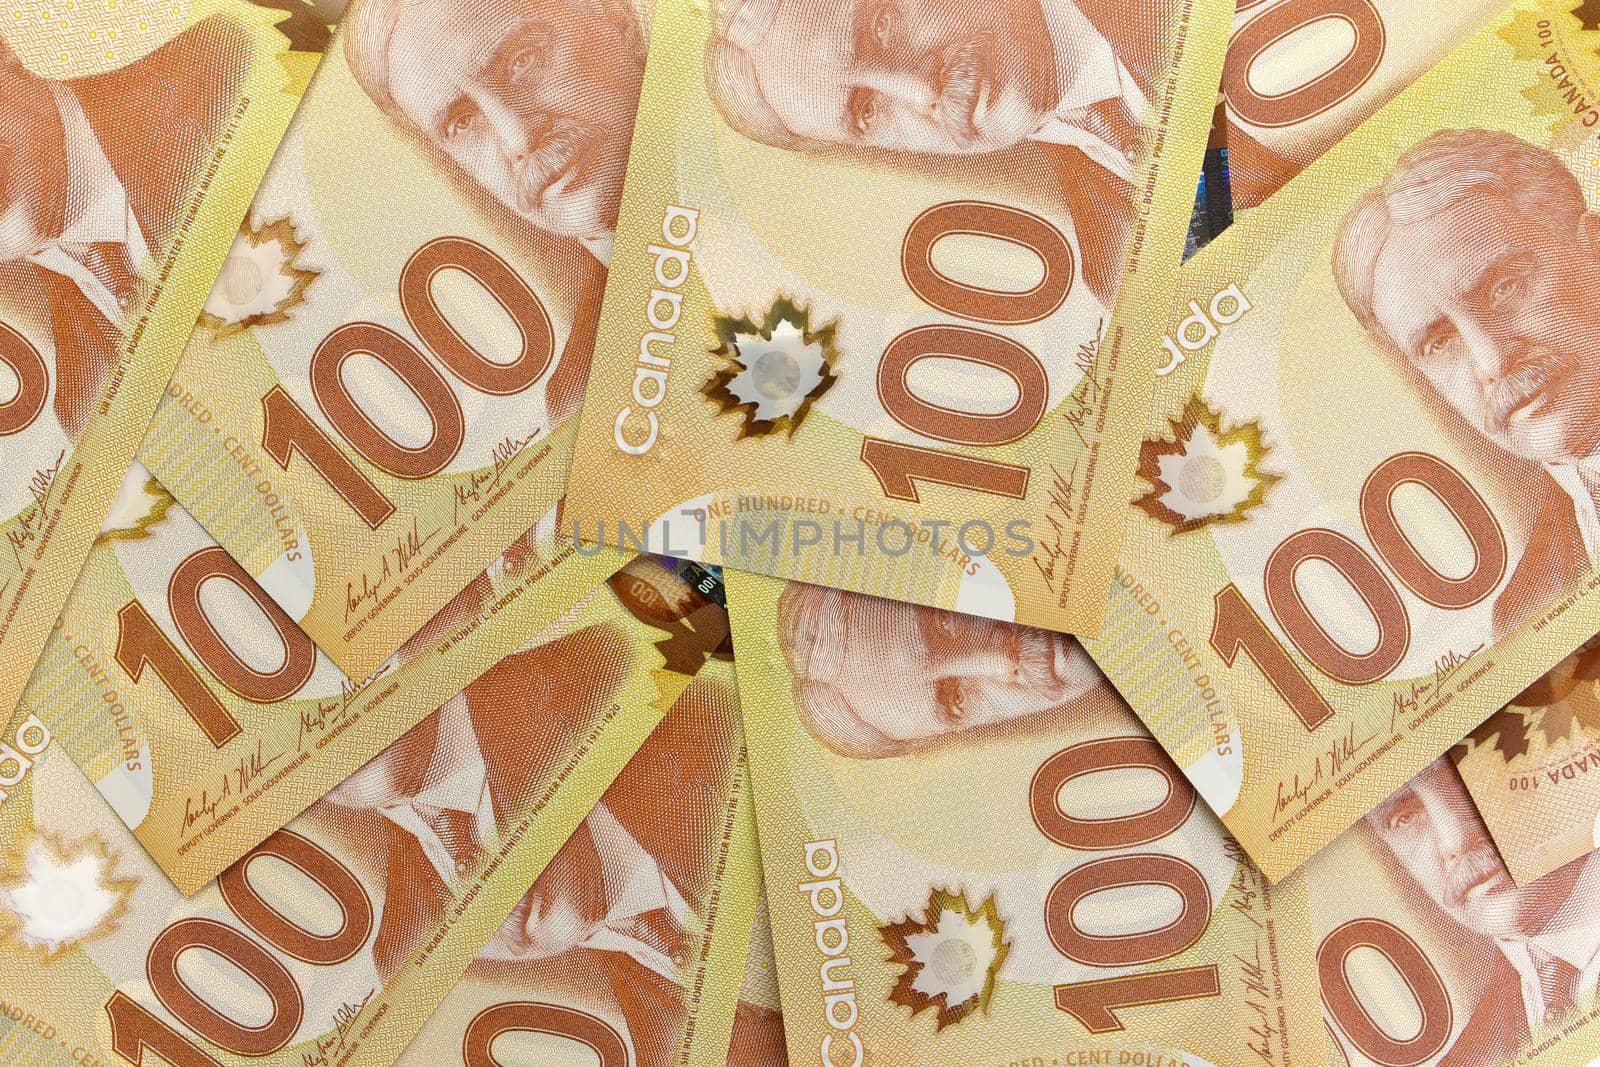 A Directly Above Image of Crisp Canadian 100 One Hundred Dollar Bills on a White Background. Banknotes are piled randomly on top of each other. Plenty of White Copy Space on Frame Right. High quality photo